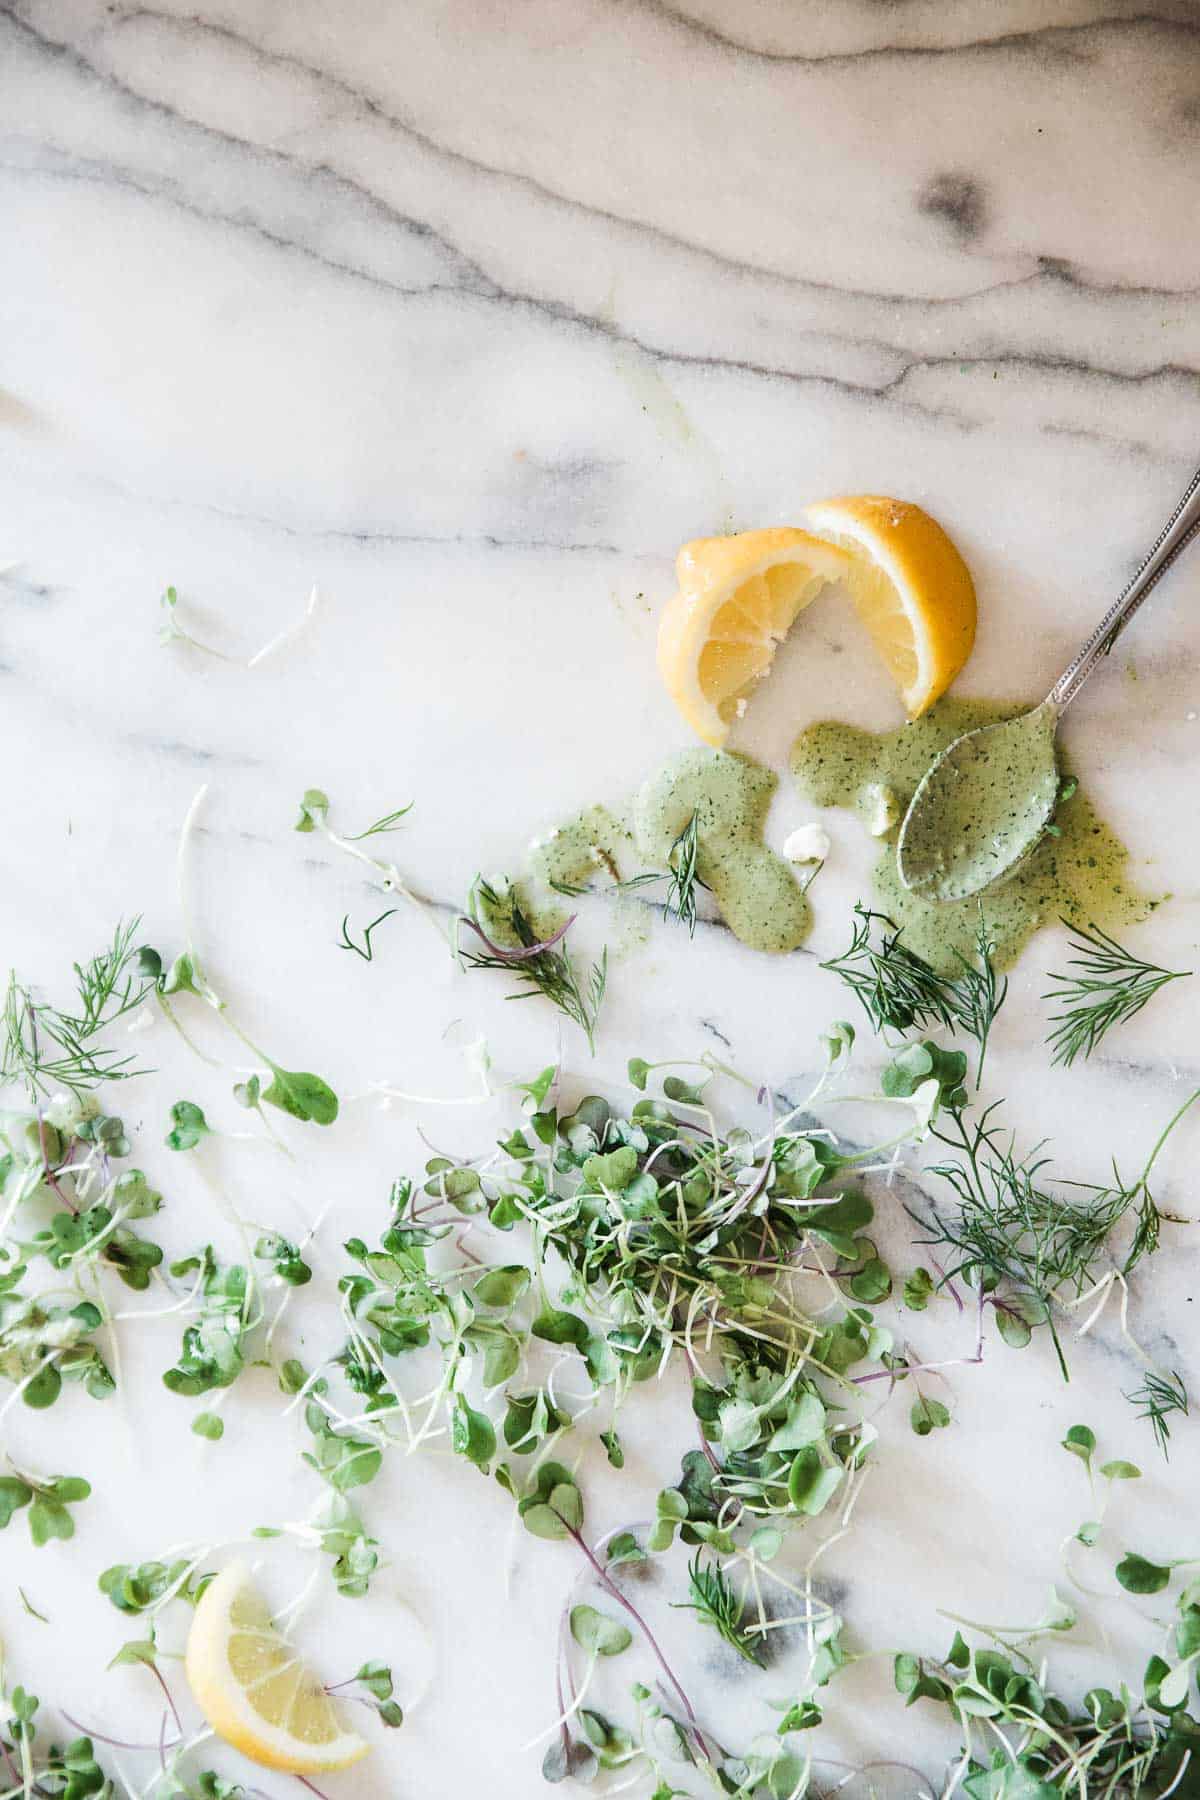 A spoon full of green goddess dressing on a marble counter surrounded by lemons and micro greens.